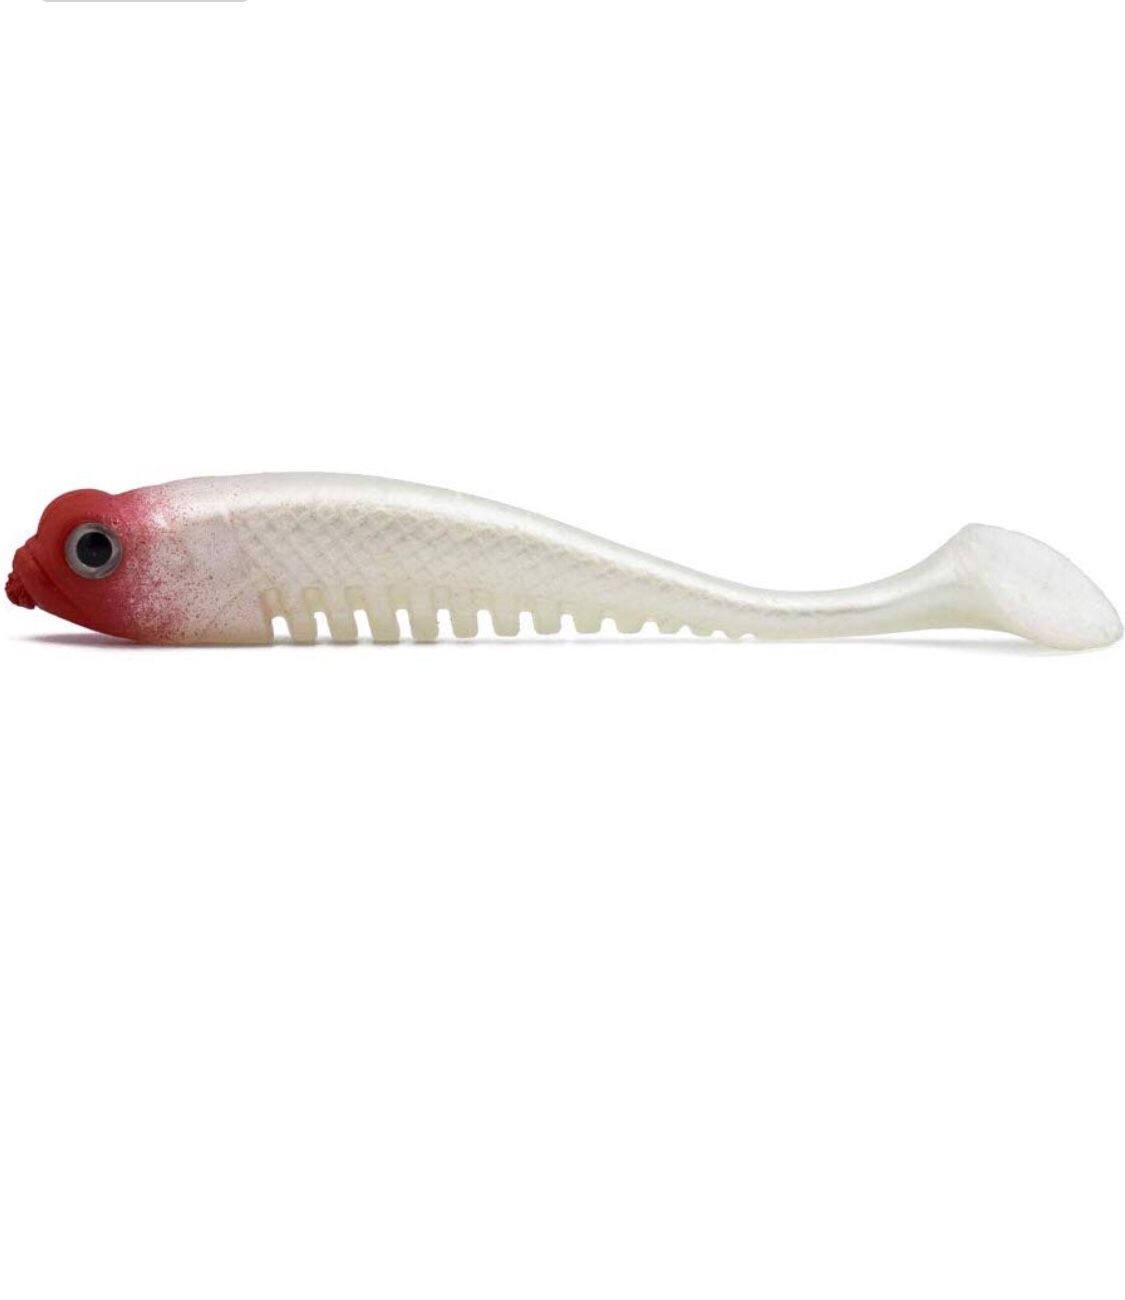 Fishing Soft Plastic Lures， Bass Bait, Soft Plastic Split Tail Lure Set Simulating The Fish Running in The Water